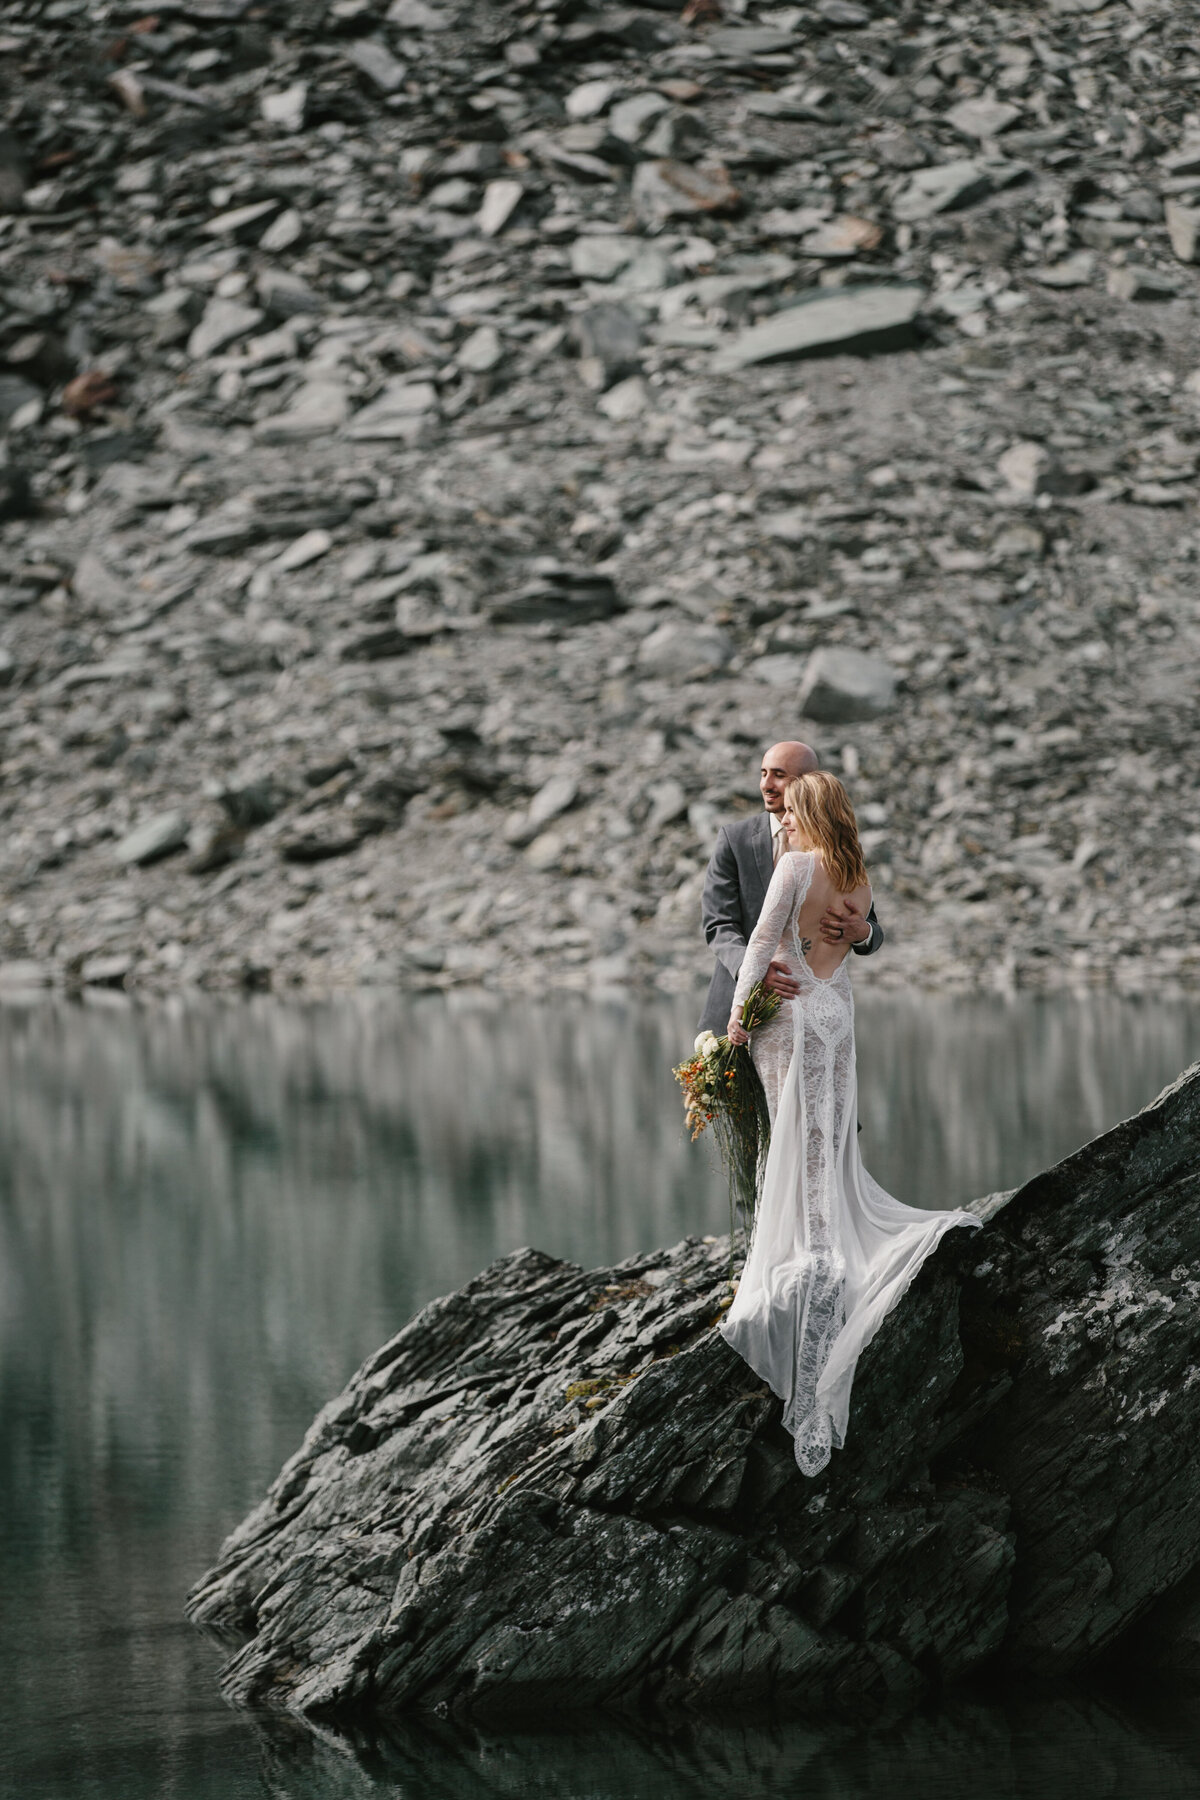 The Lovers Elopement Co - bride and groom together on rock next to lake with reflections - destination wedding Queenstown